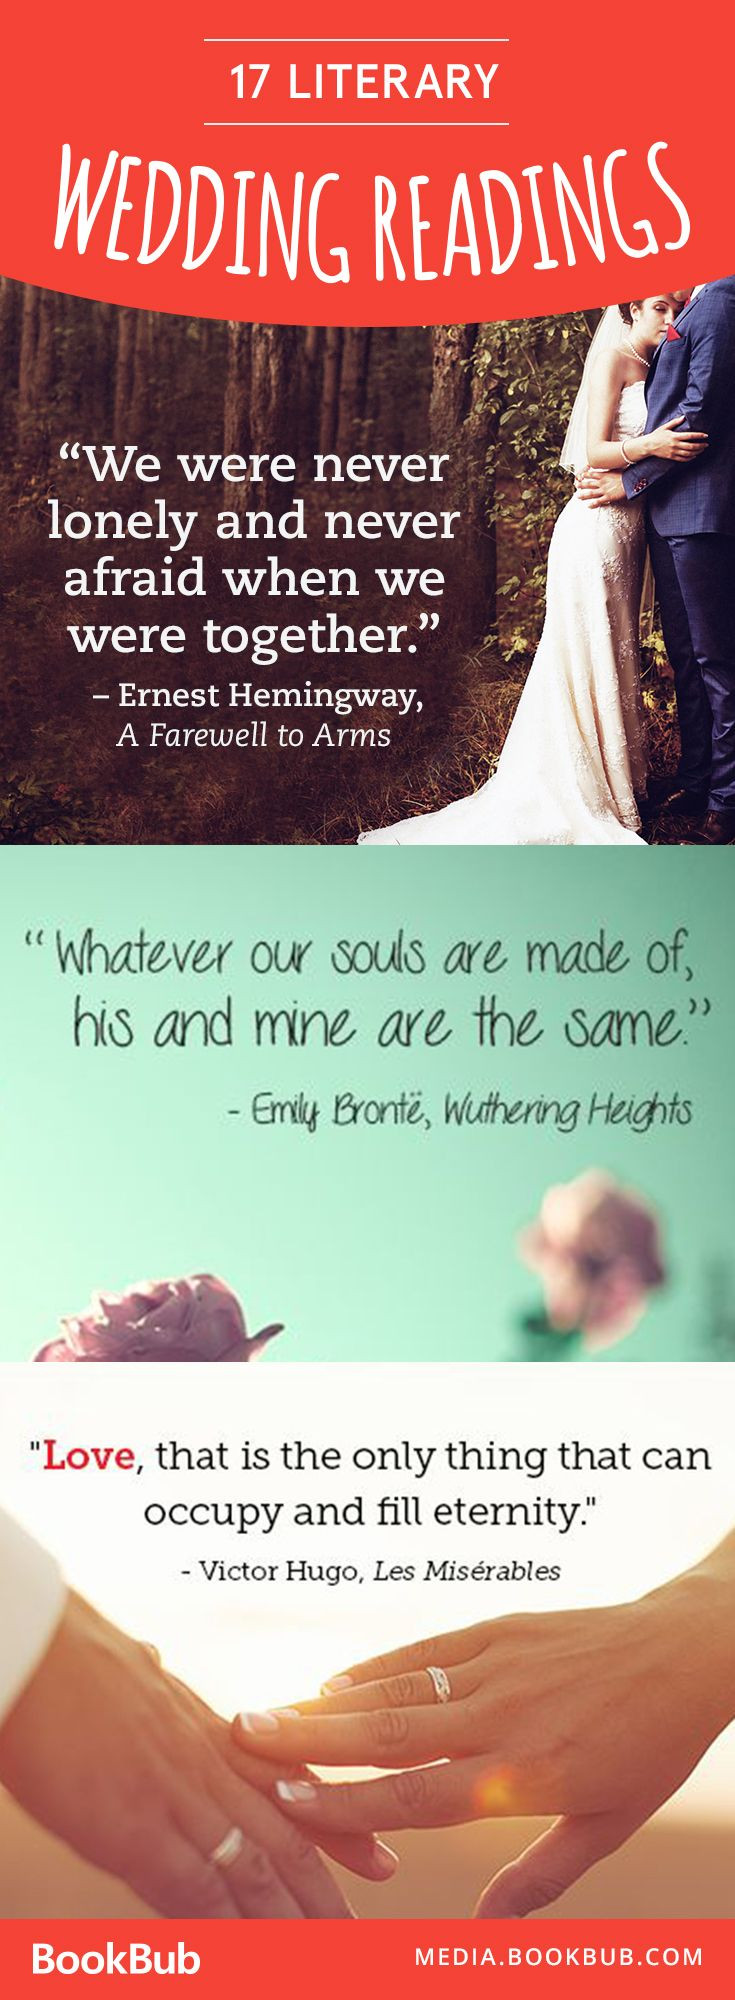 Literary Quotes About Marriage
 25 unique Wedding card quotes ideas on Pinterest